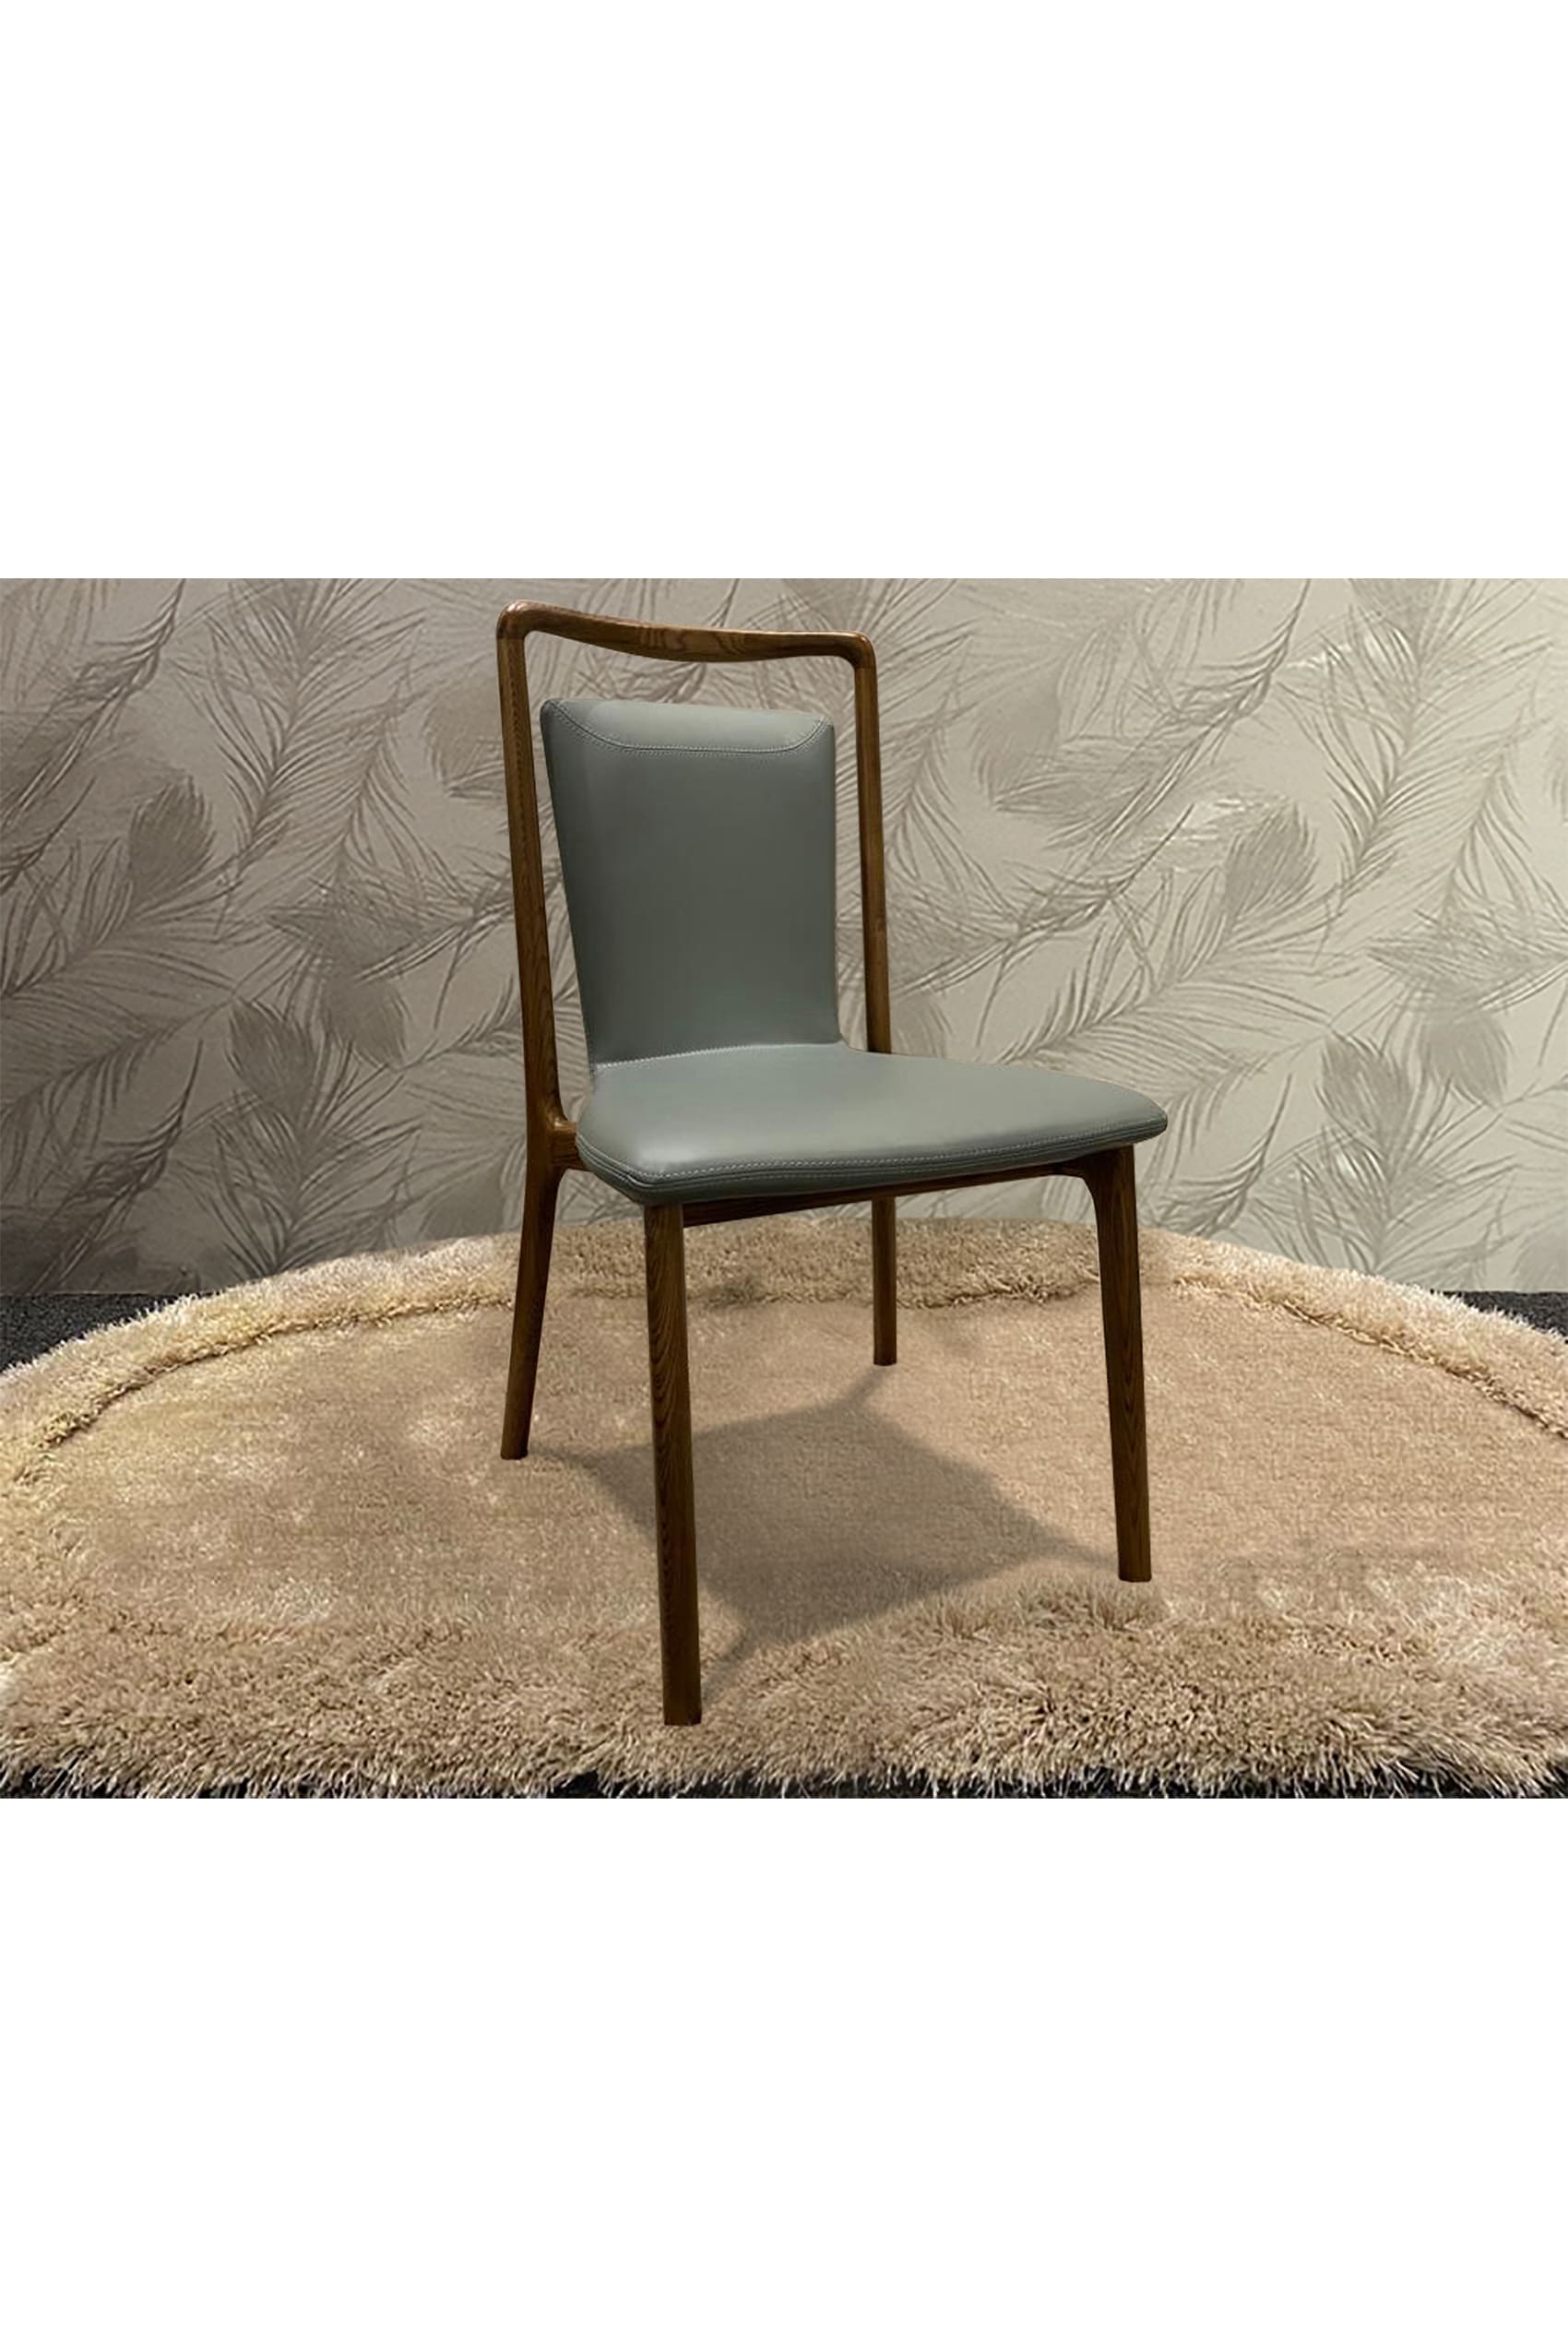 Elfwood Classic Dining Chair